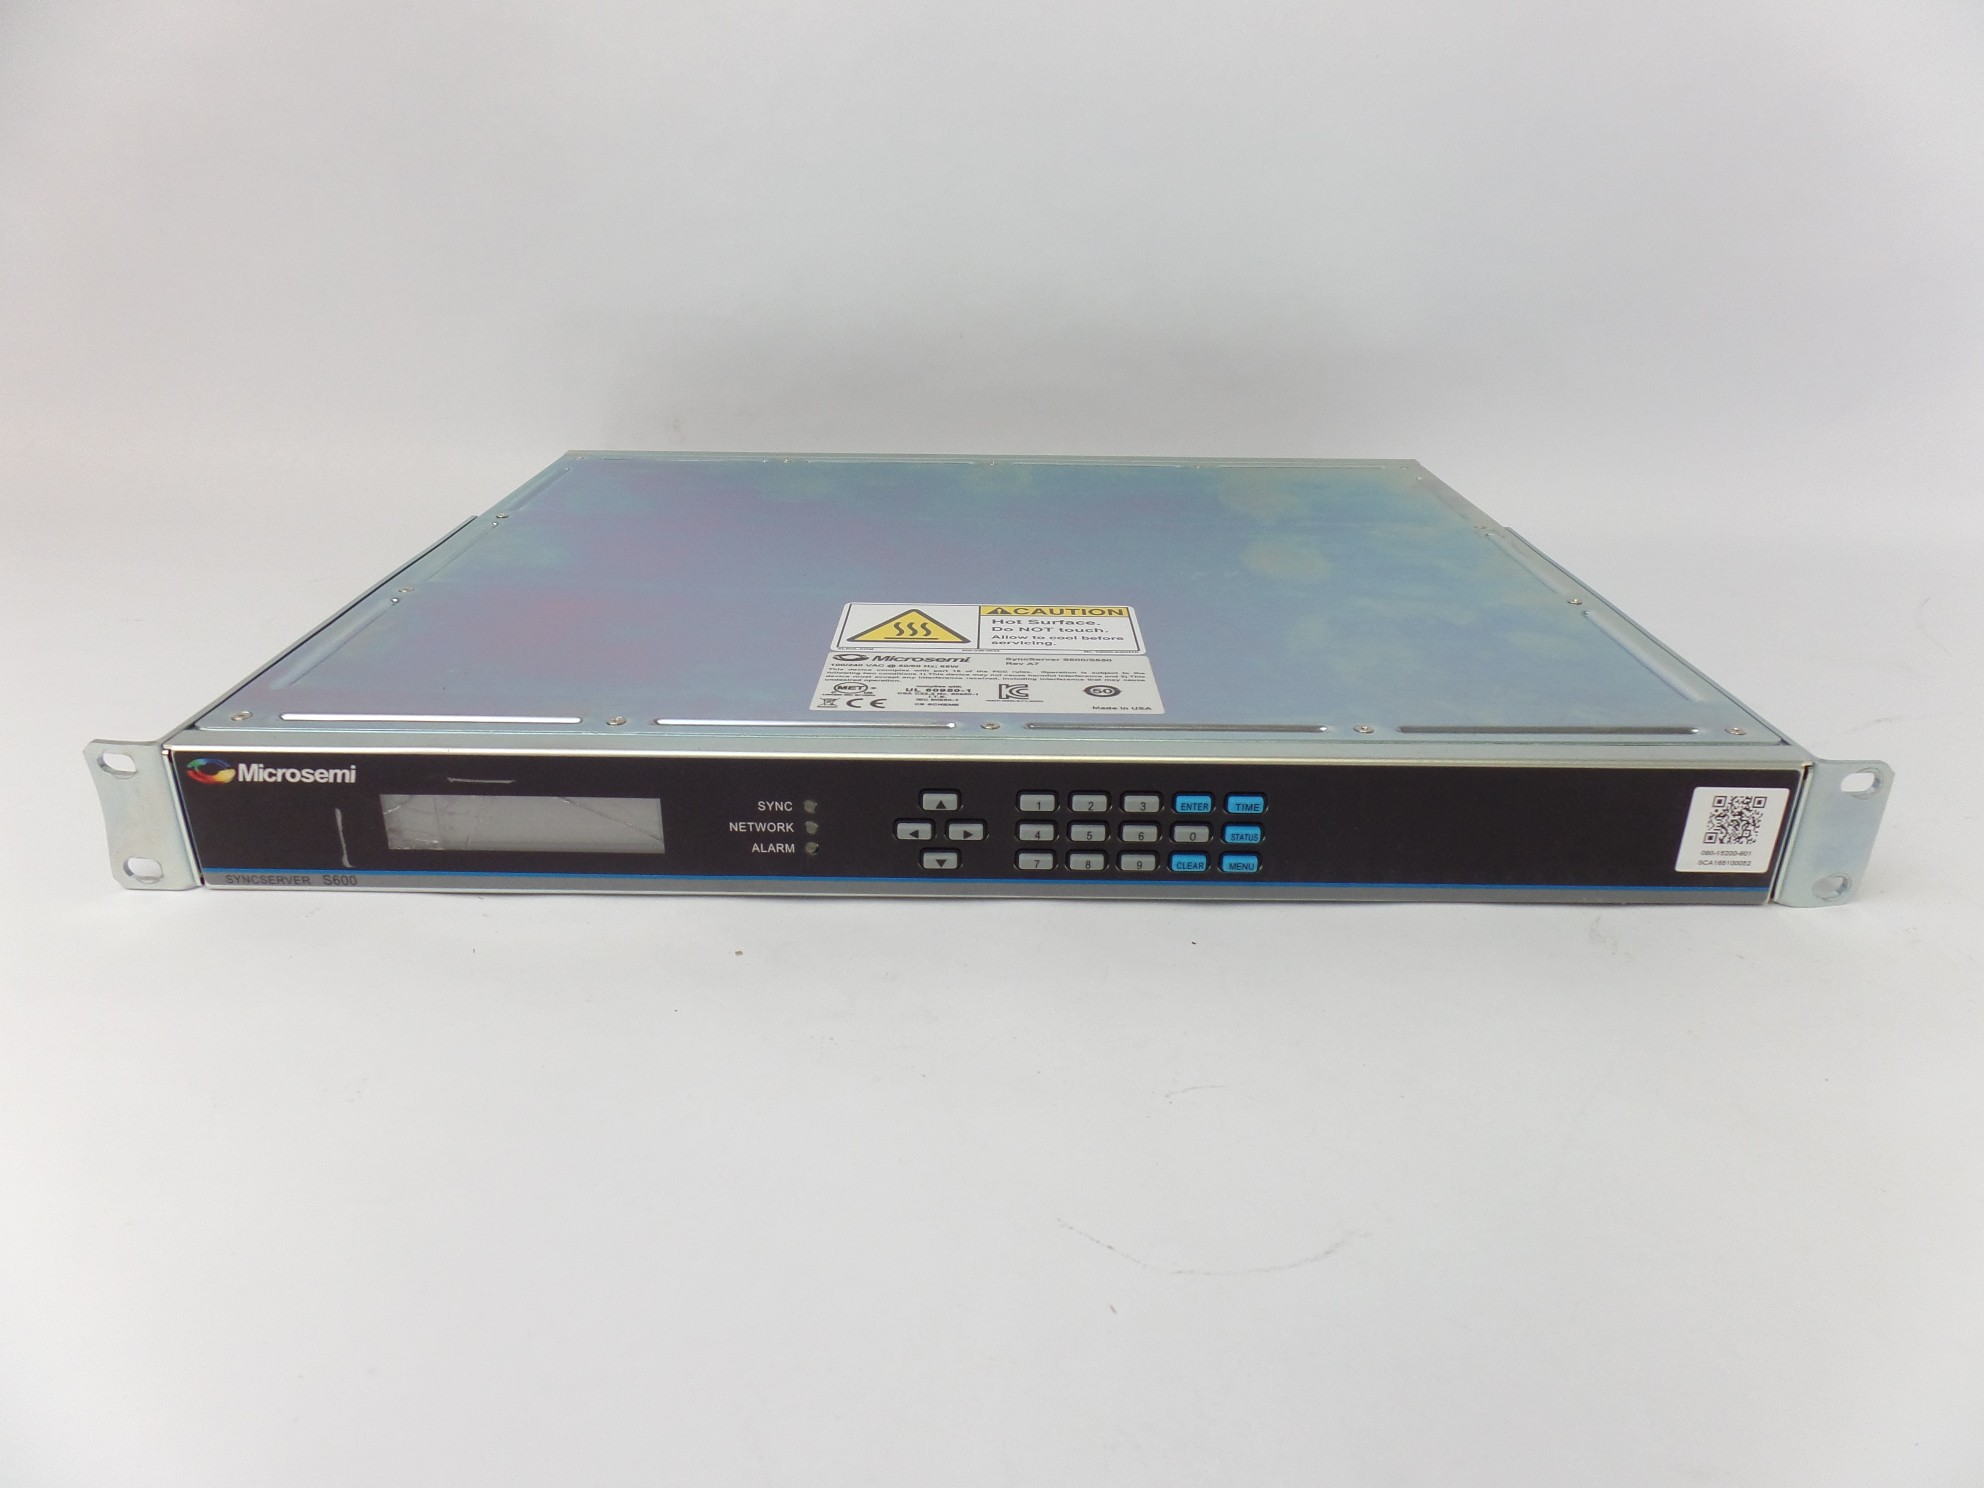 READ: Microsemi SyncServer S600 / S650 090-1520-601 Server - AS IS